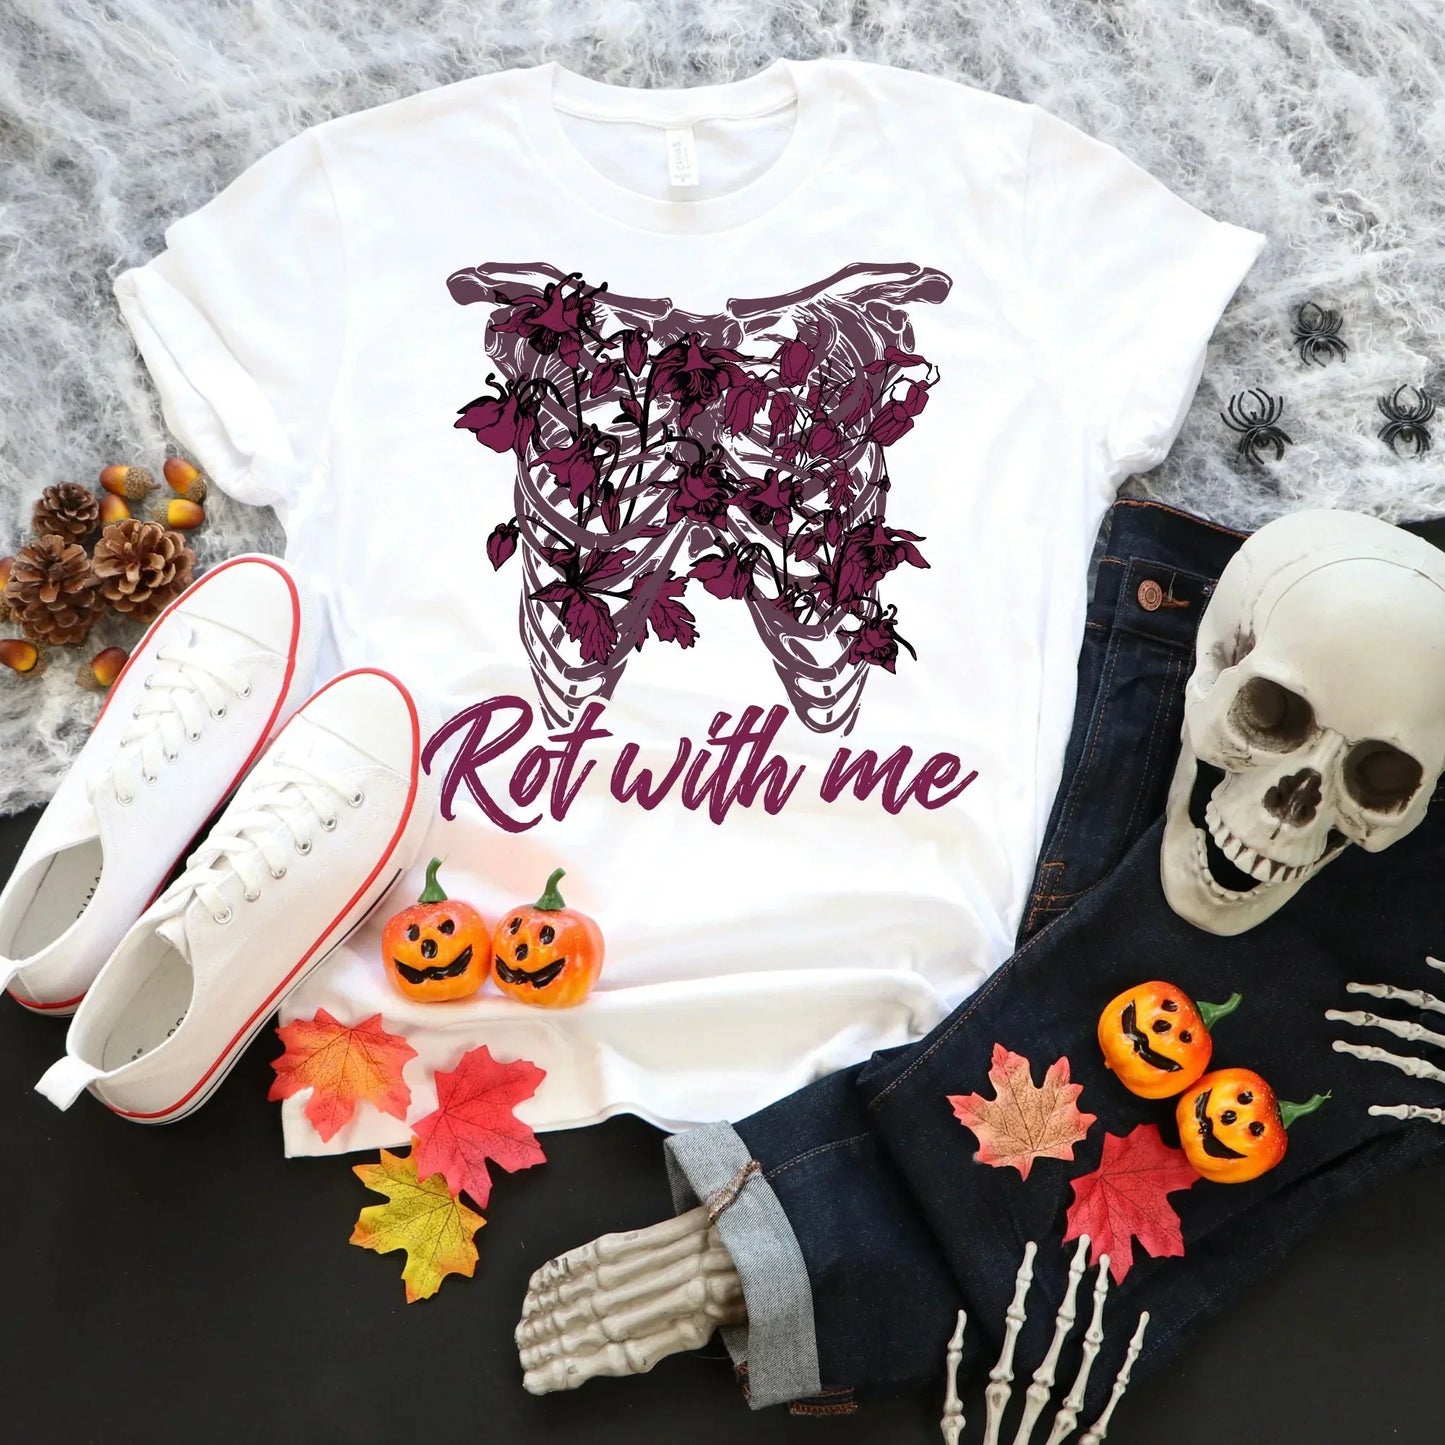 Gothic Shirt, Halloween Sweatshirt, Witchy Vibes, Bats & Dead Roses Shirt, Moon Shirt, Magical Witch Shirt, Goth Style, Rot with Me, EMO Tee